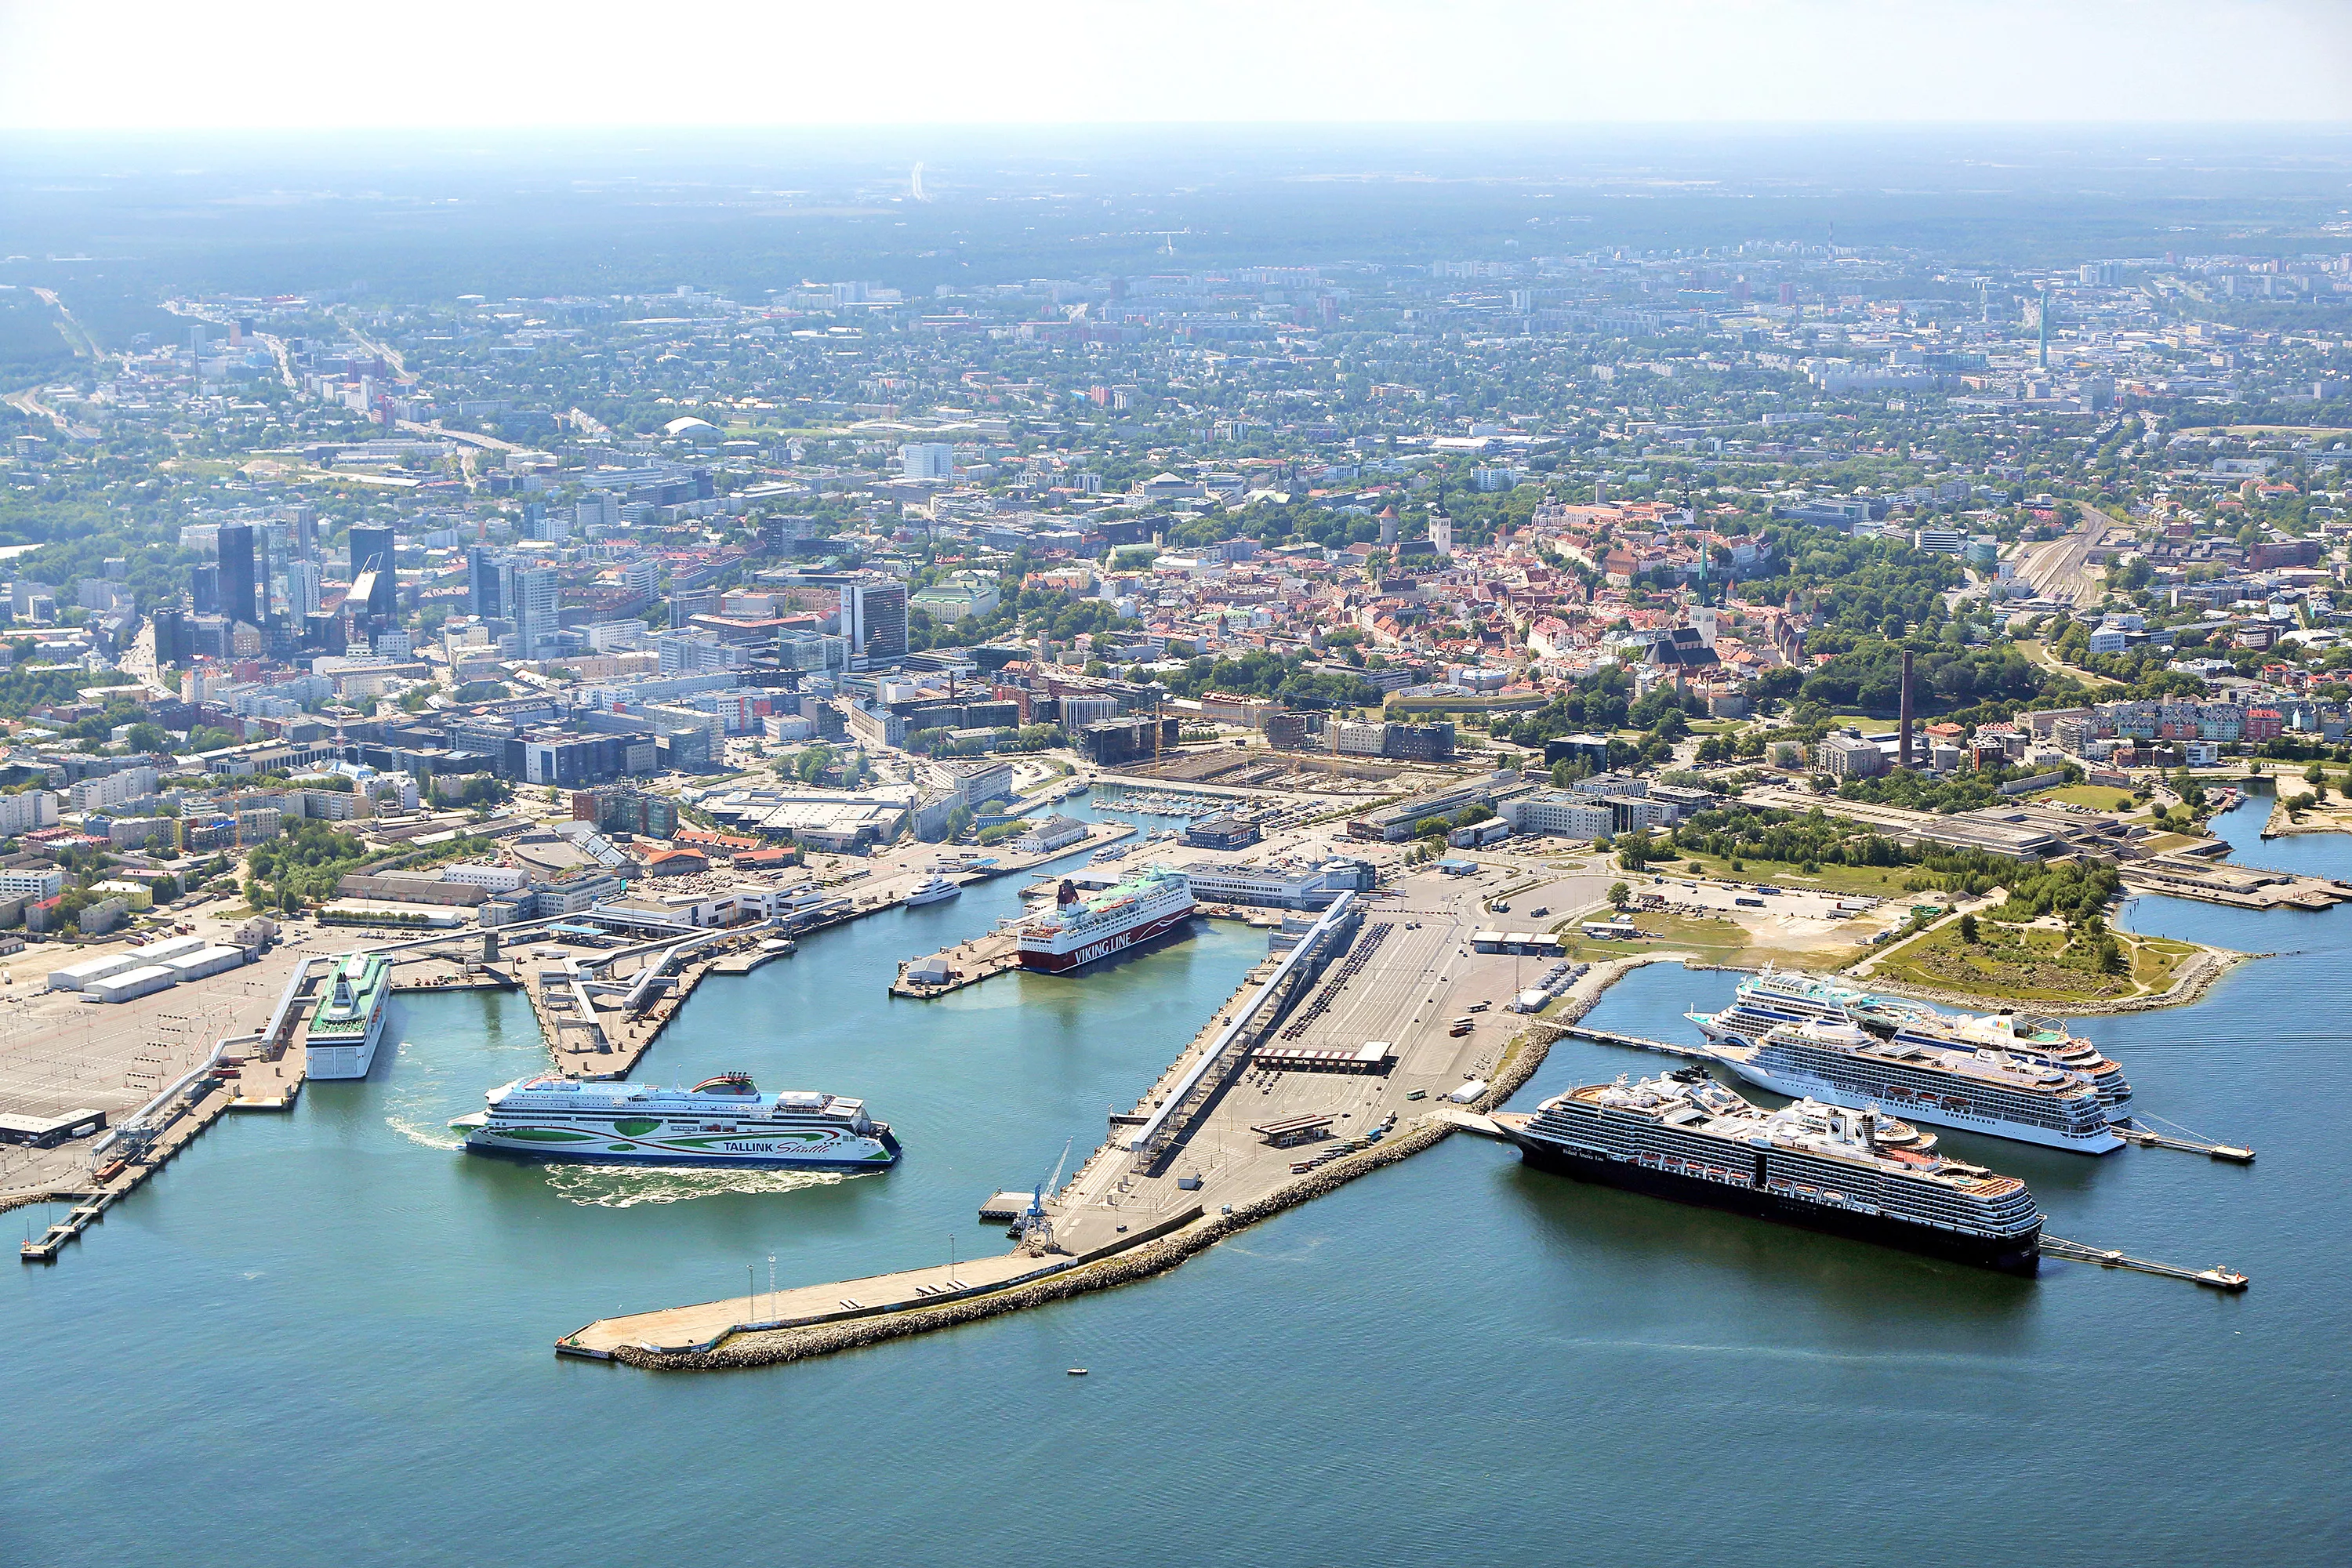 Port of Tallinn in Estonia, Europe | Yachting - Rated 4.1